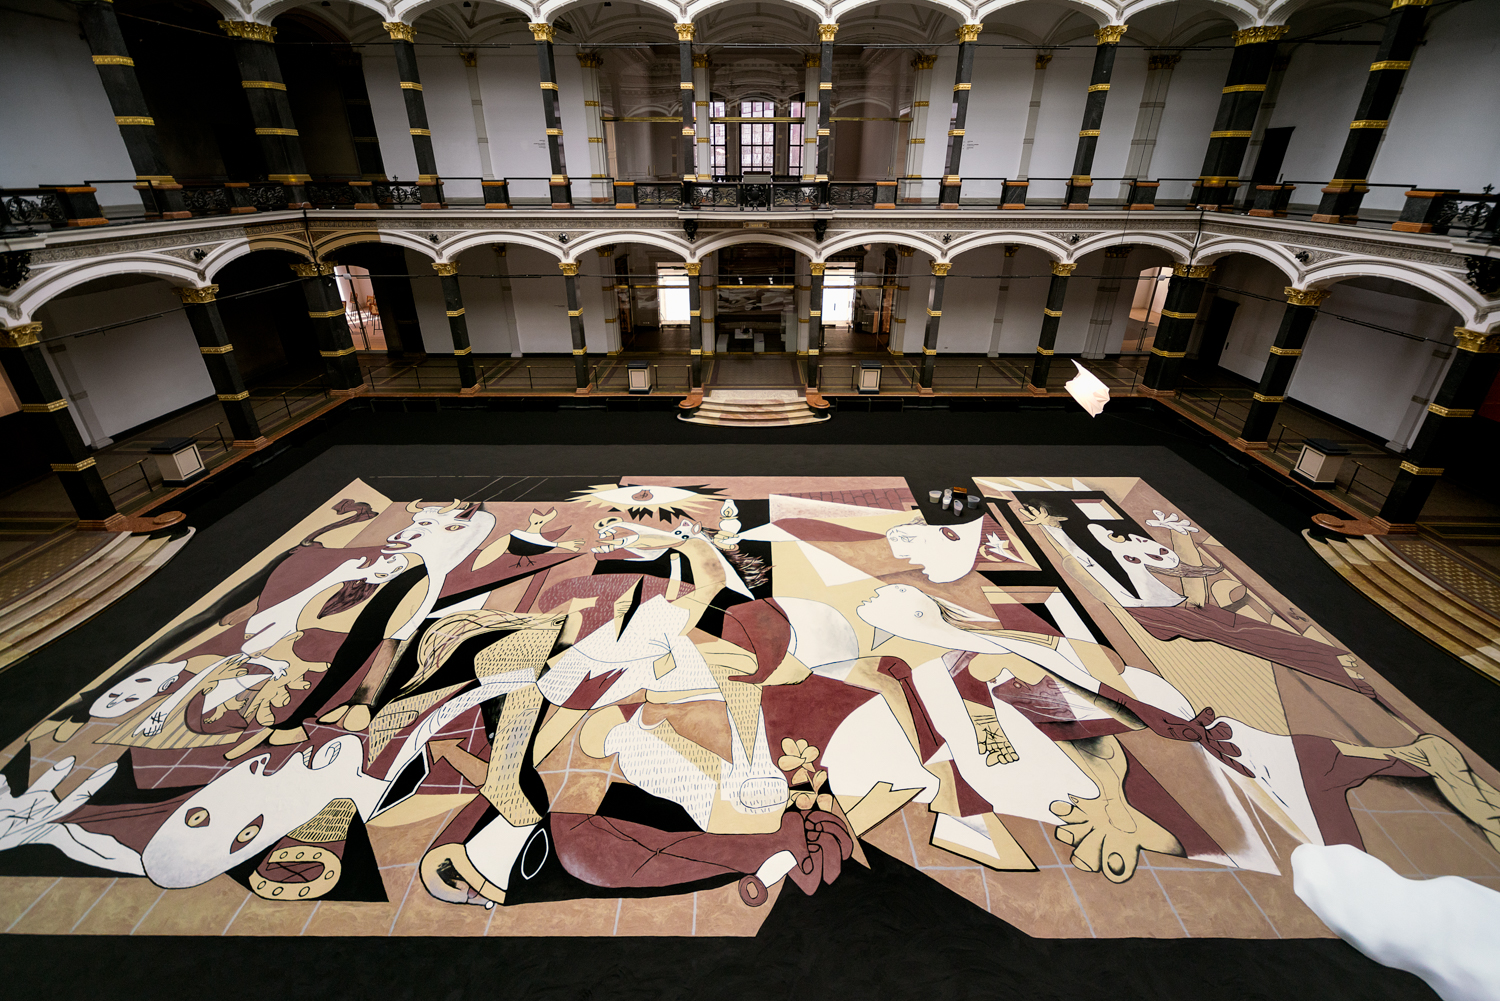 A large, stylized art piece laid out on a grand hall floor with arches and columns.